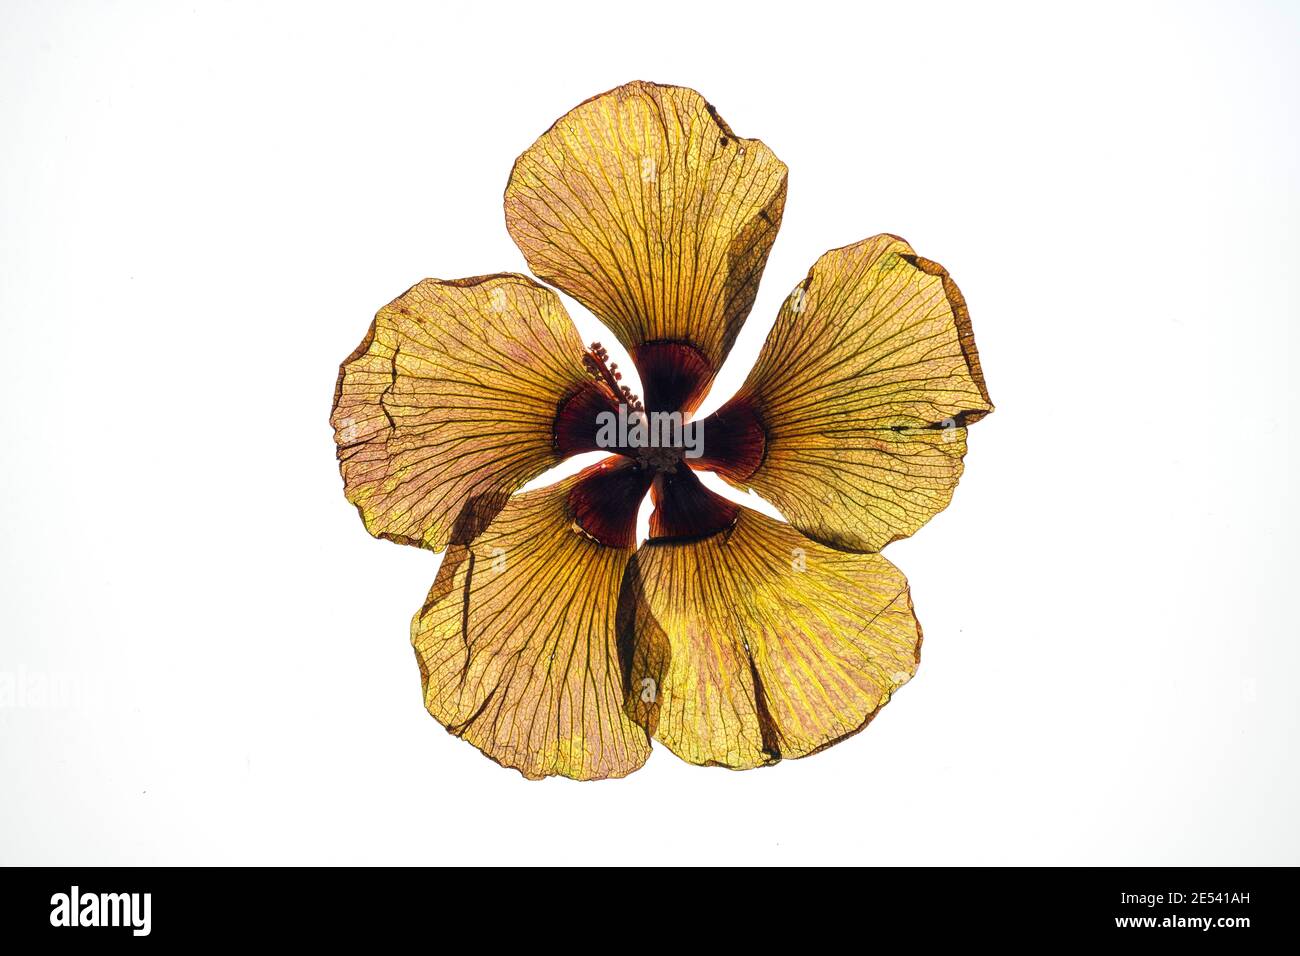 Beach Hibiscus, Hibiscus tiliaceus, pressed dried flower head from the Maldives on a white background Stock Photo